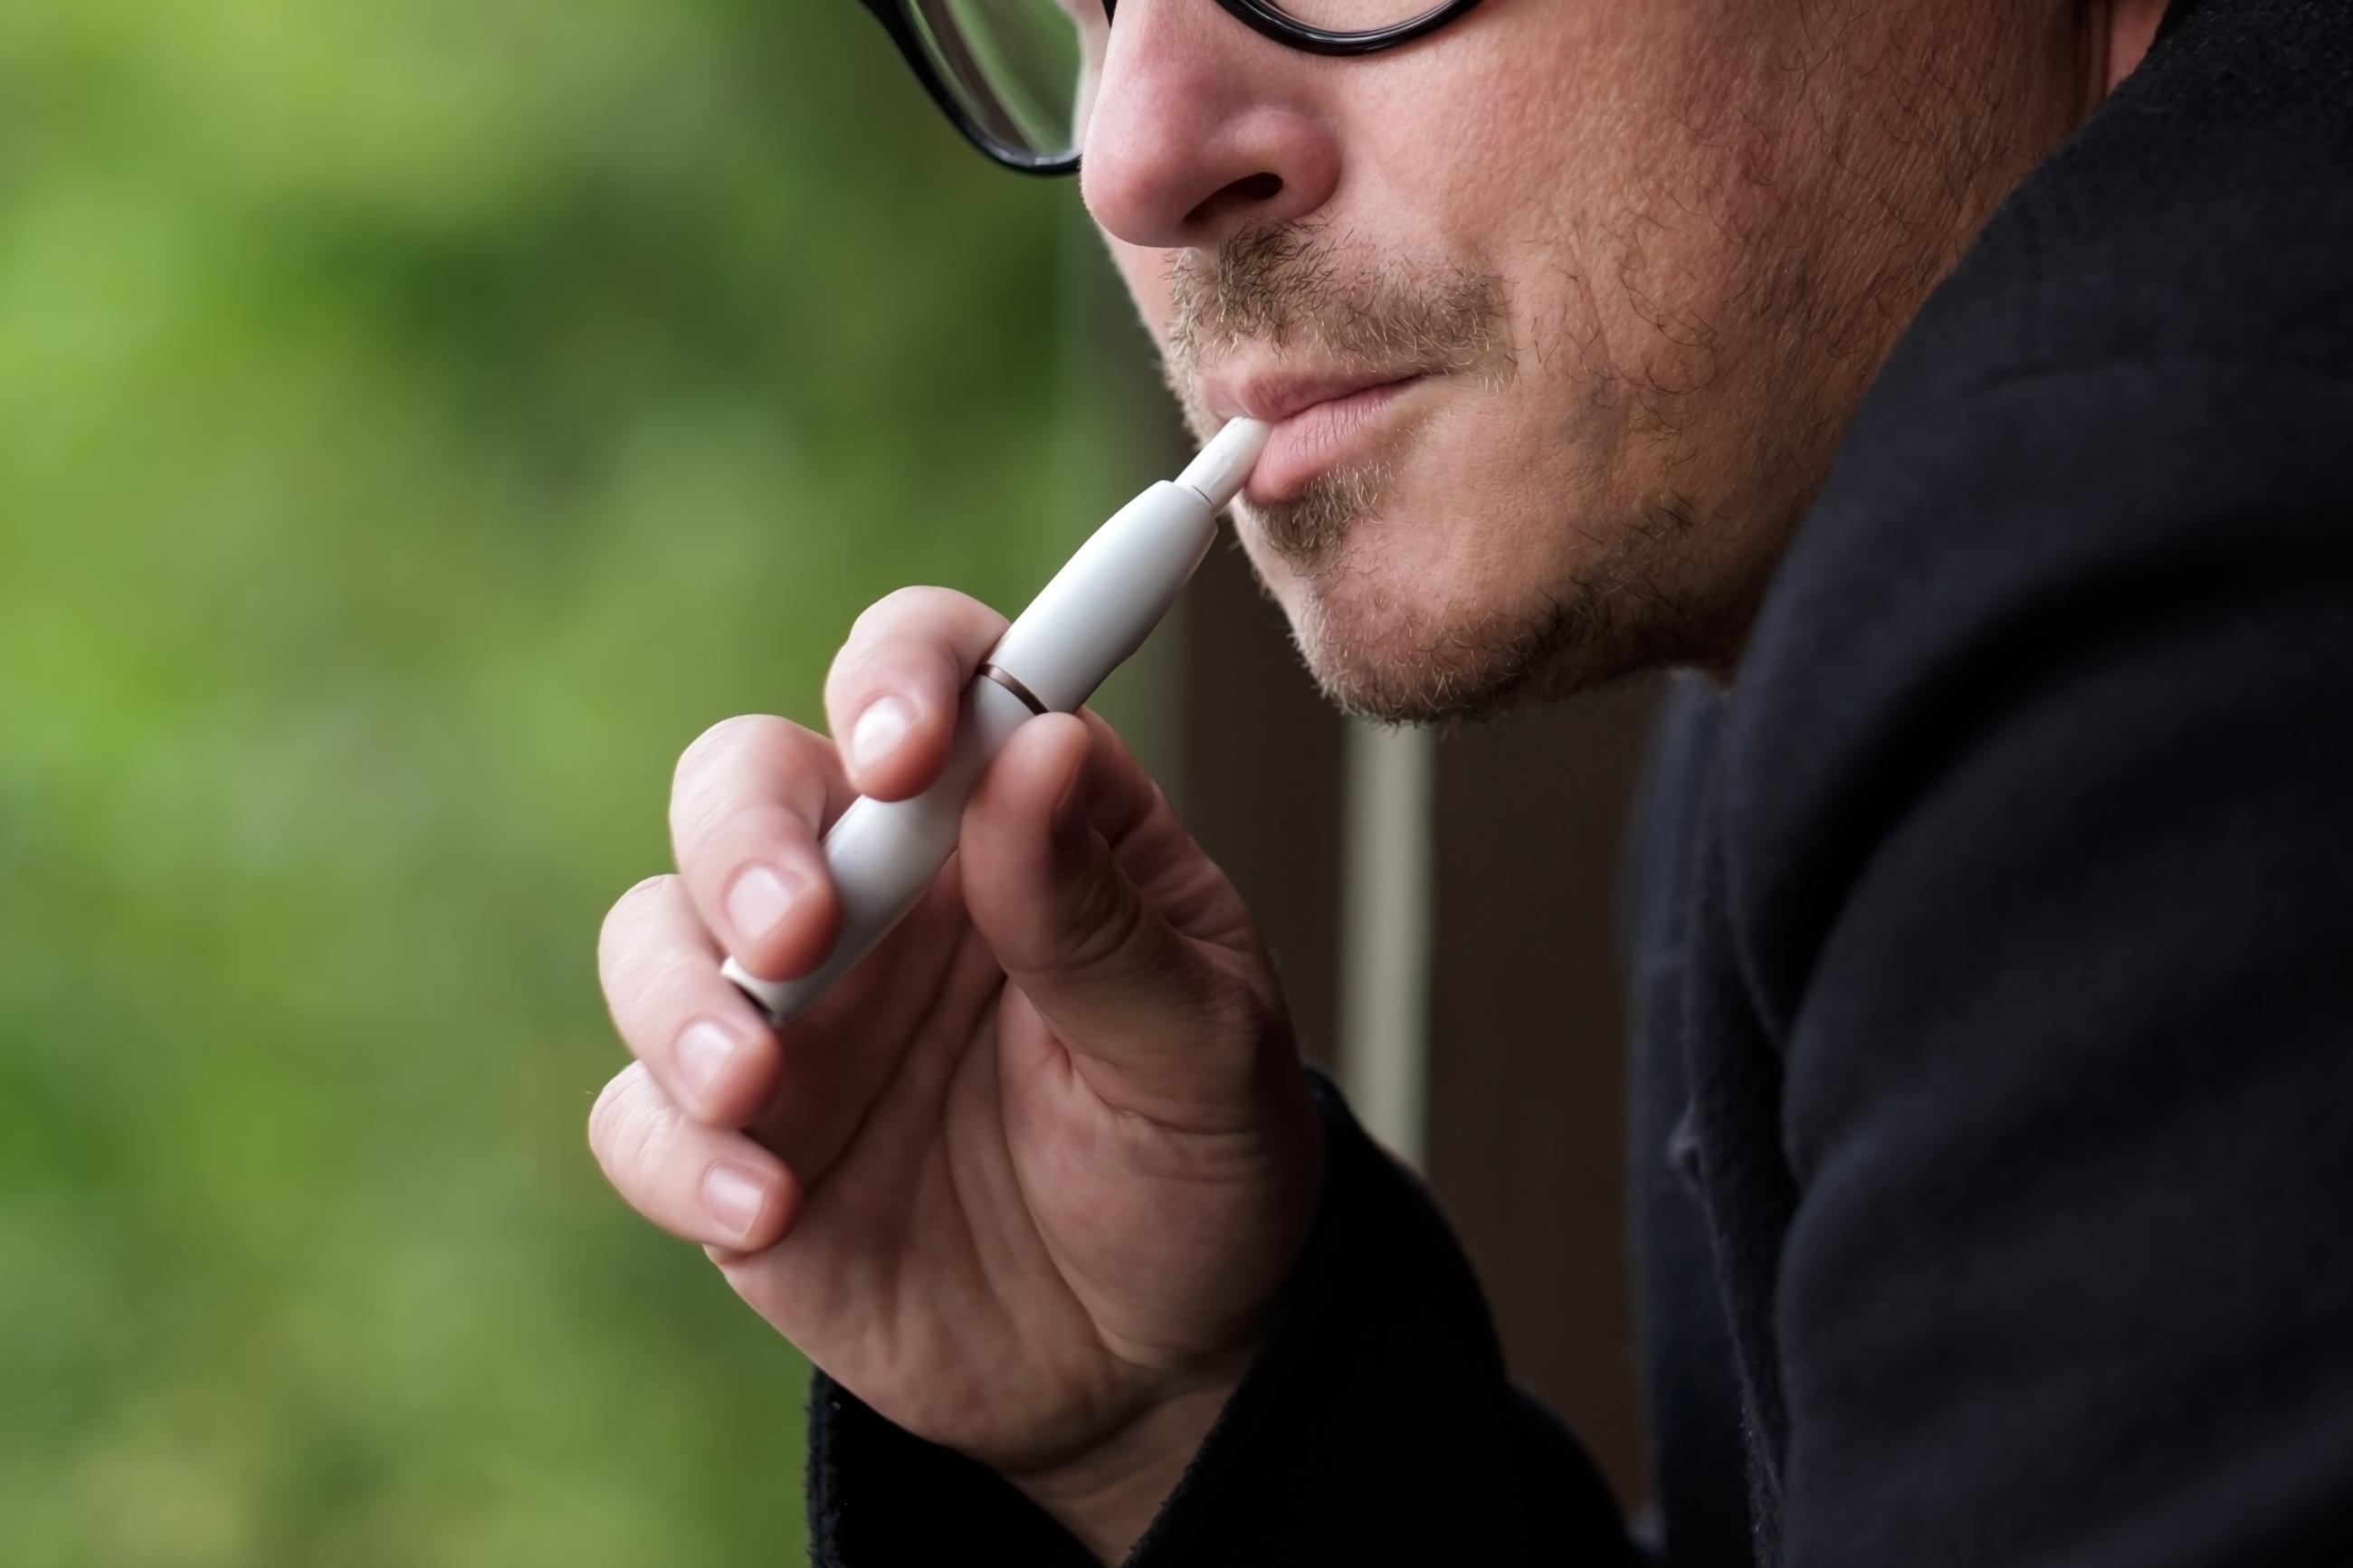 Smoking and Vaping: Which is Right for You?